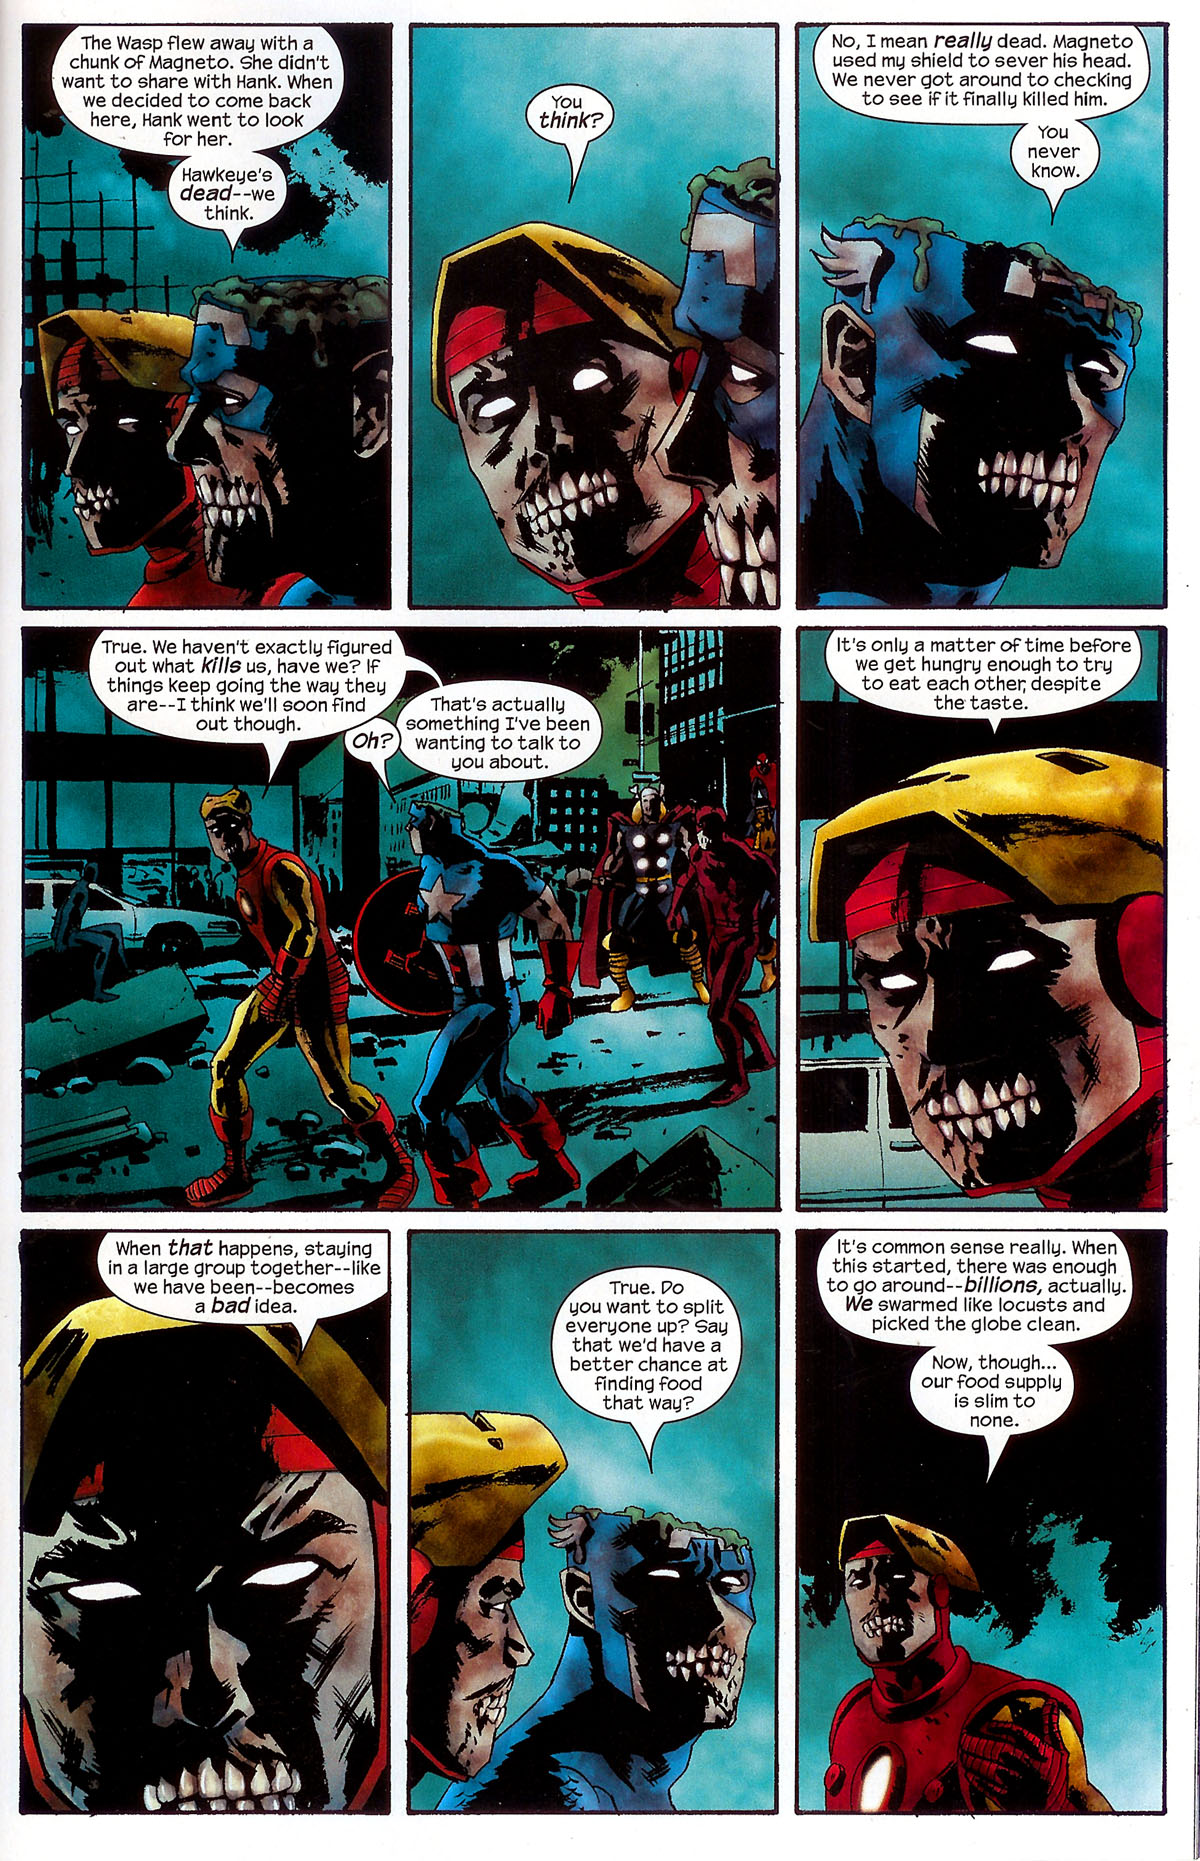 Marvel Zombies 1. Part 2 of 5